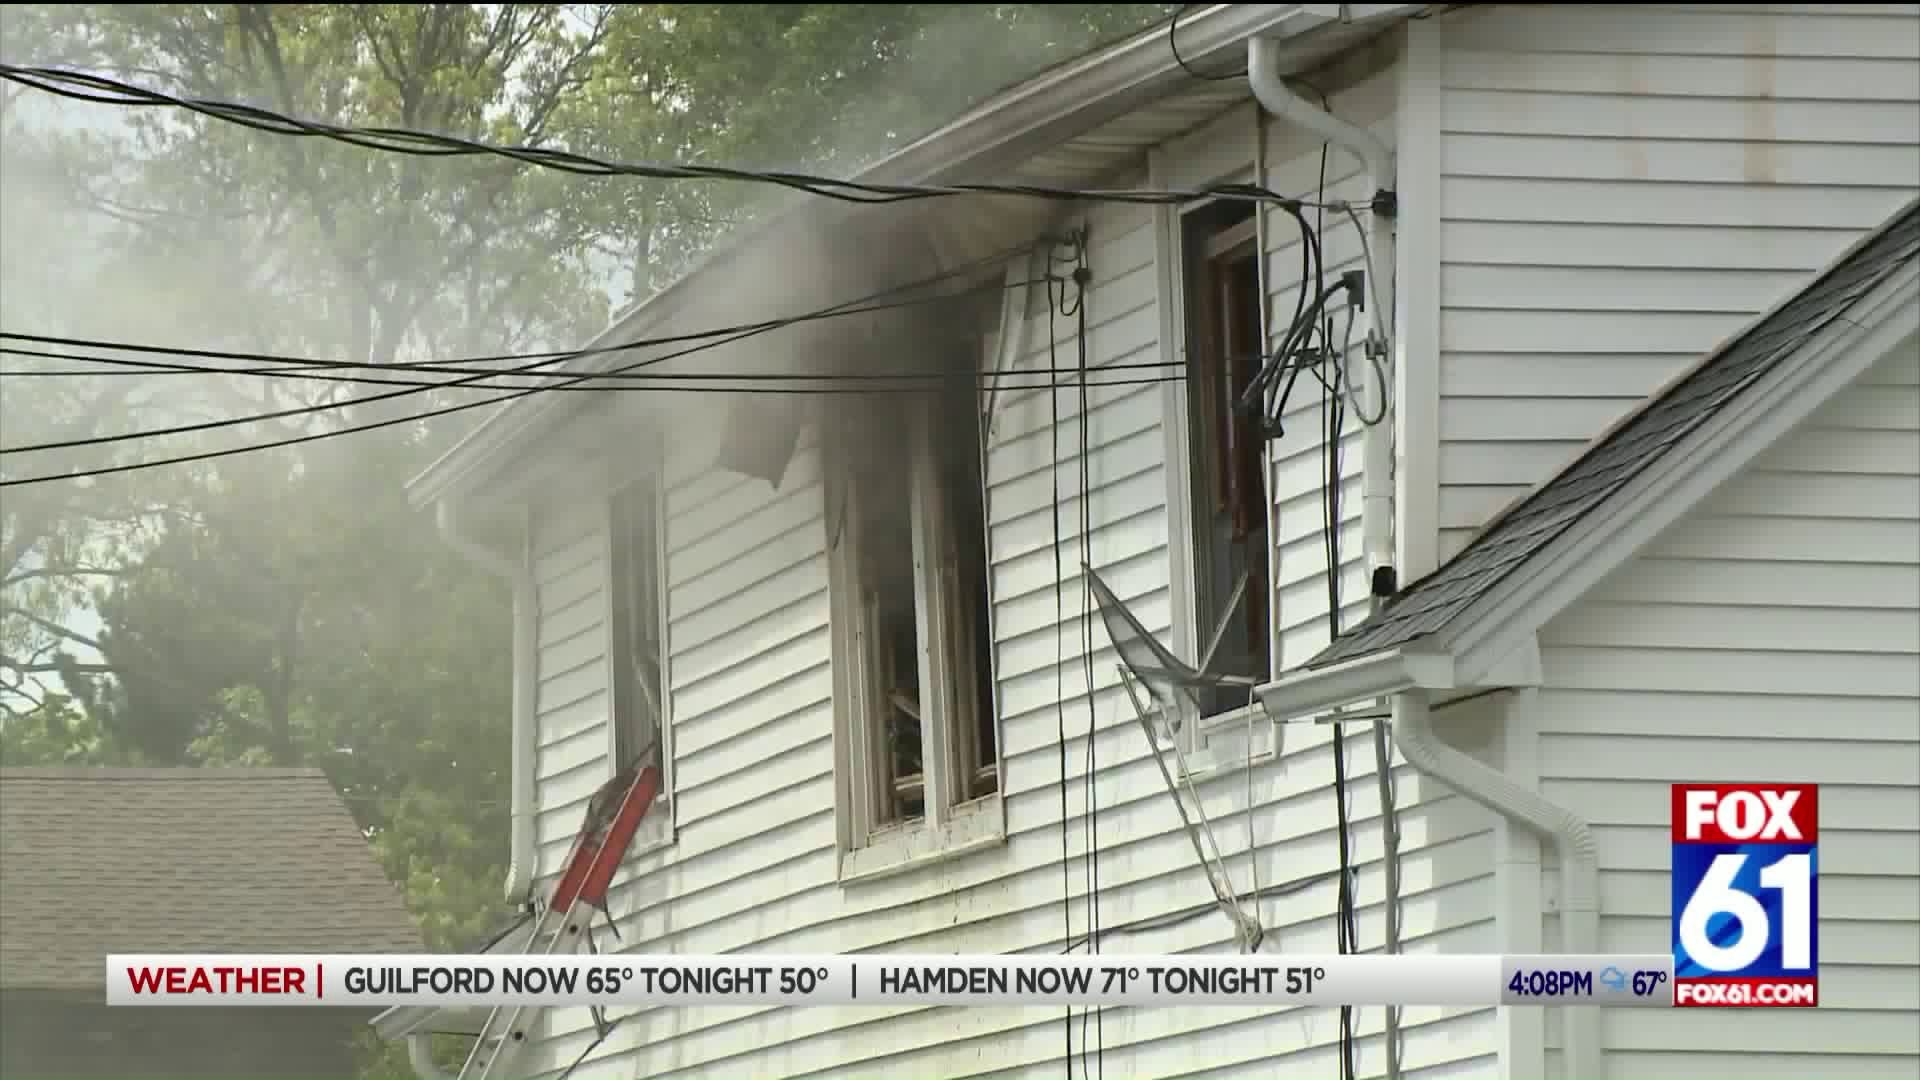 Man seriously burned in Plainville fire